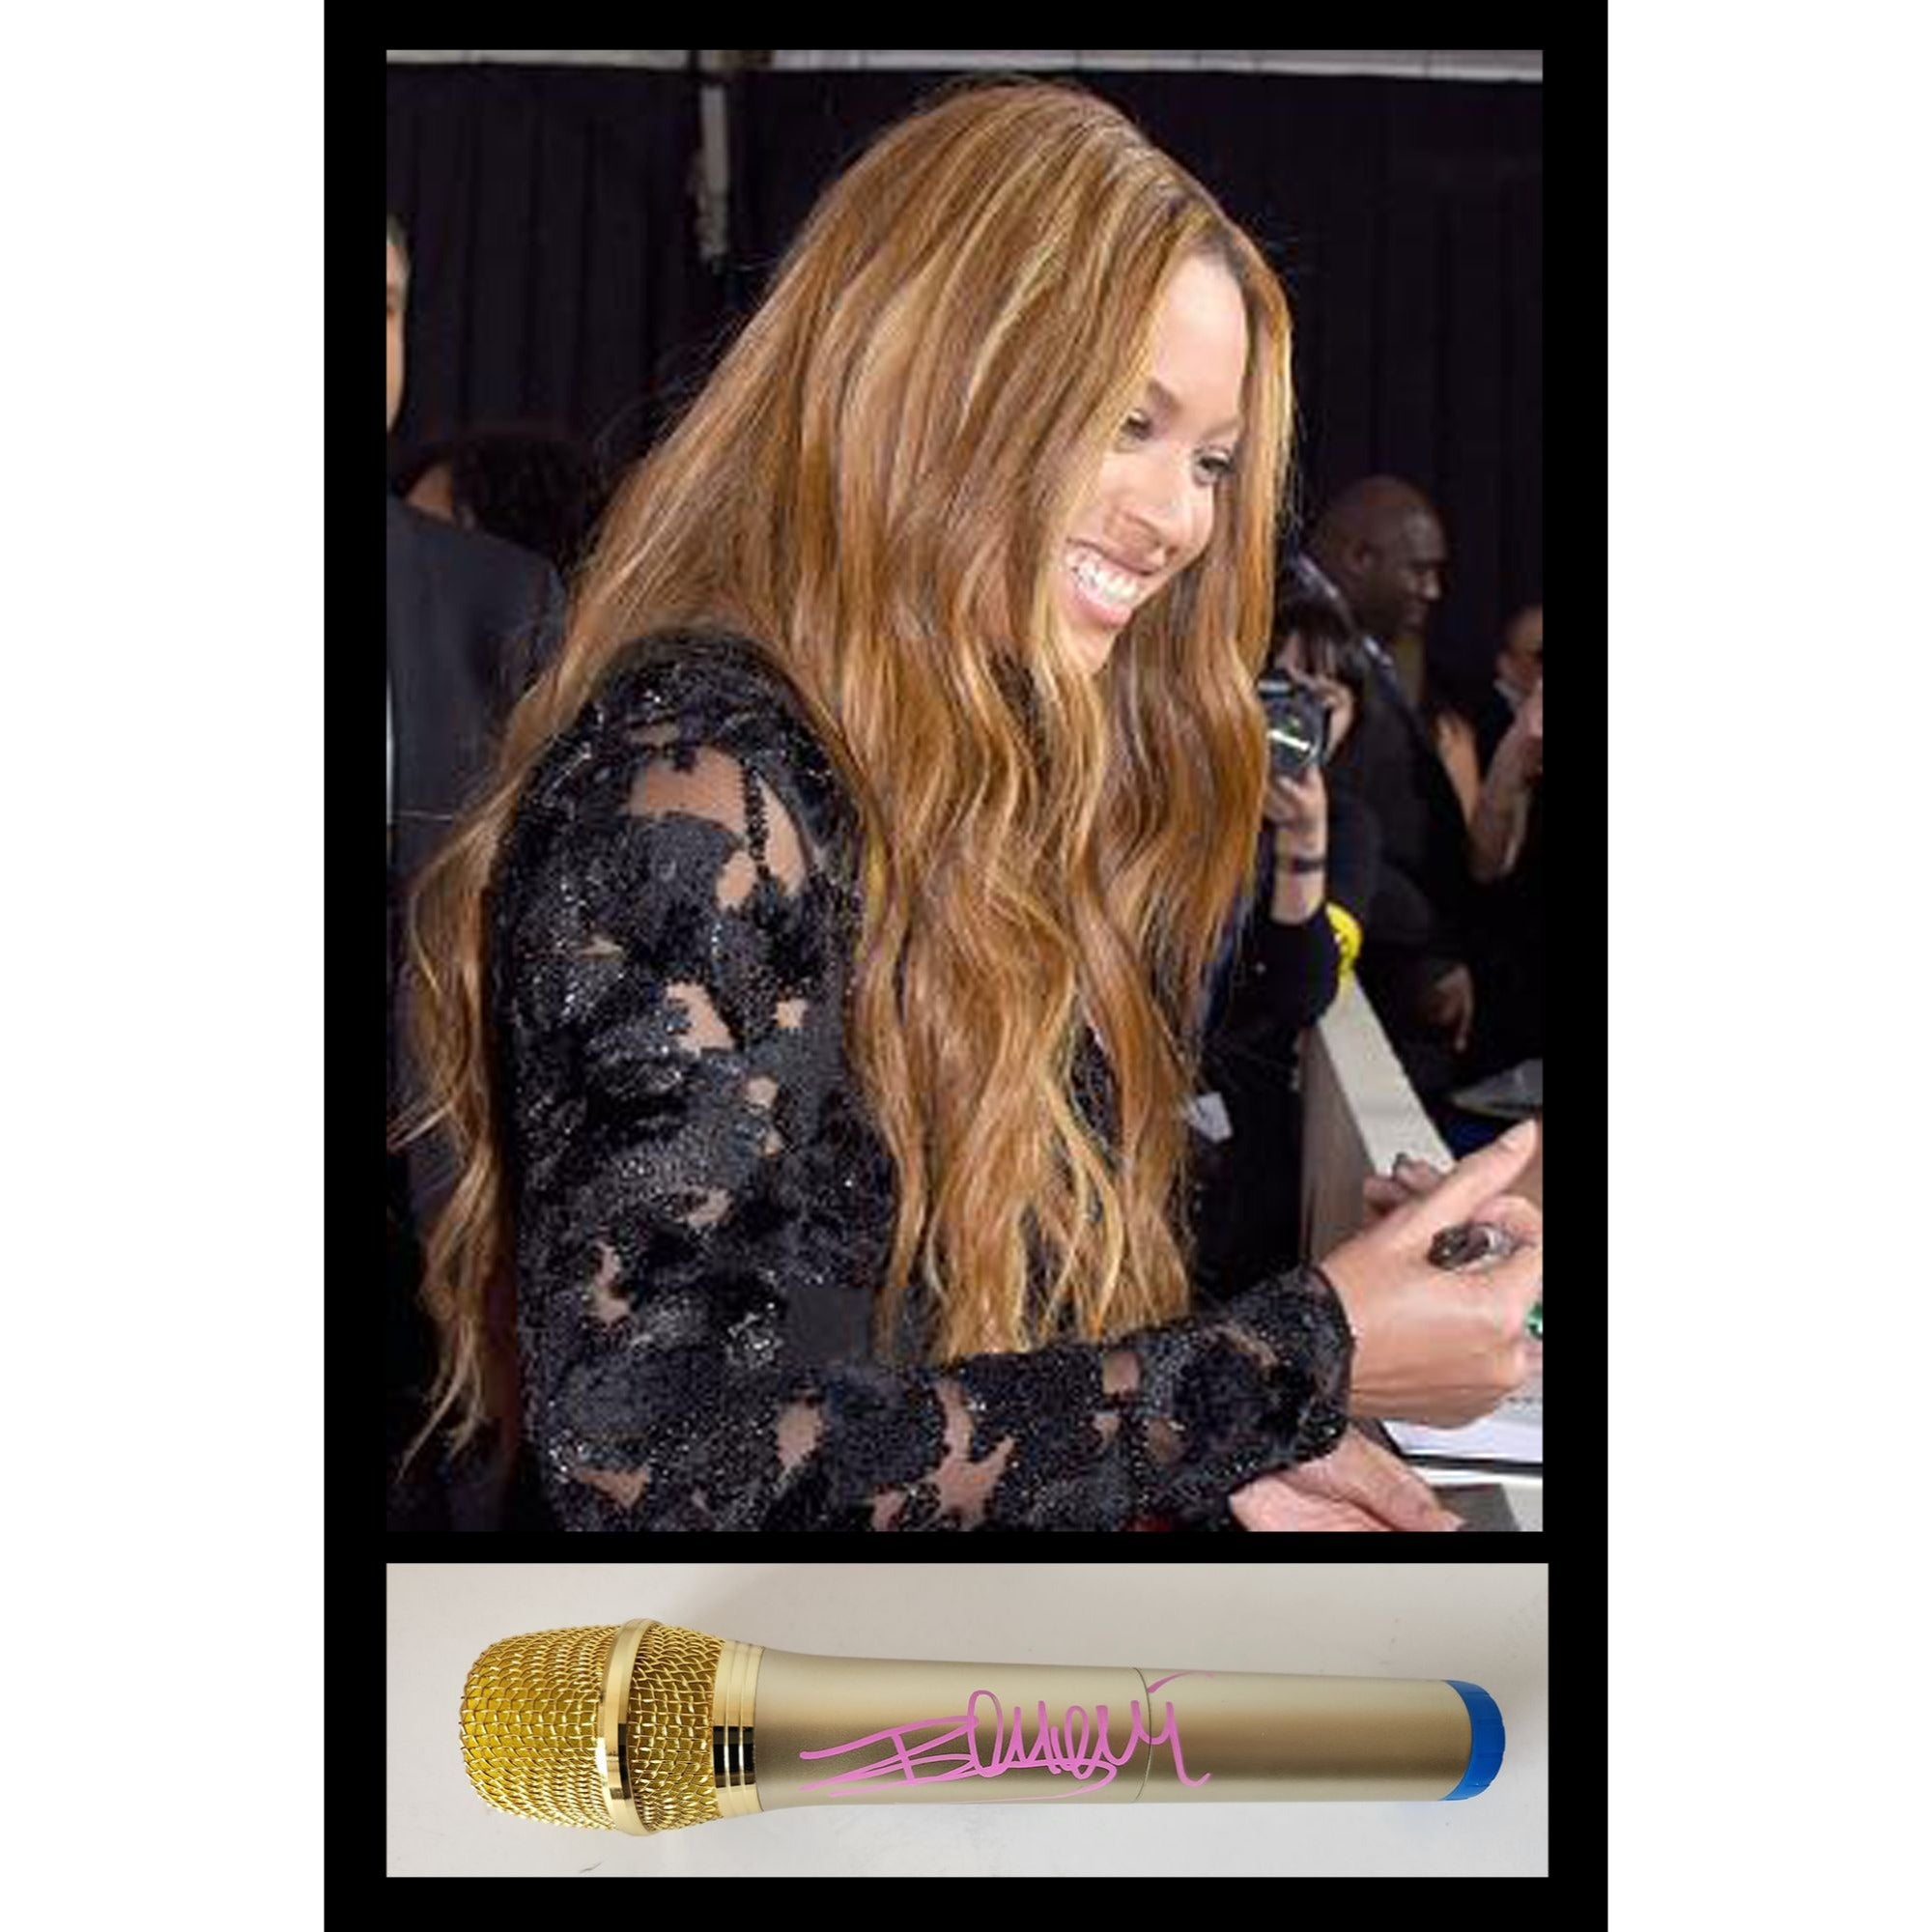 Beyoncé Knowles One of a Kind microphone signed with proof